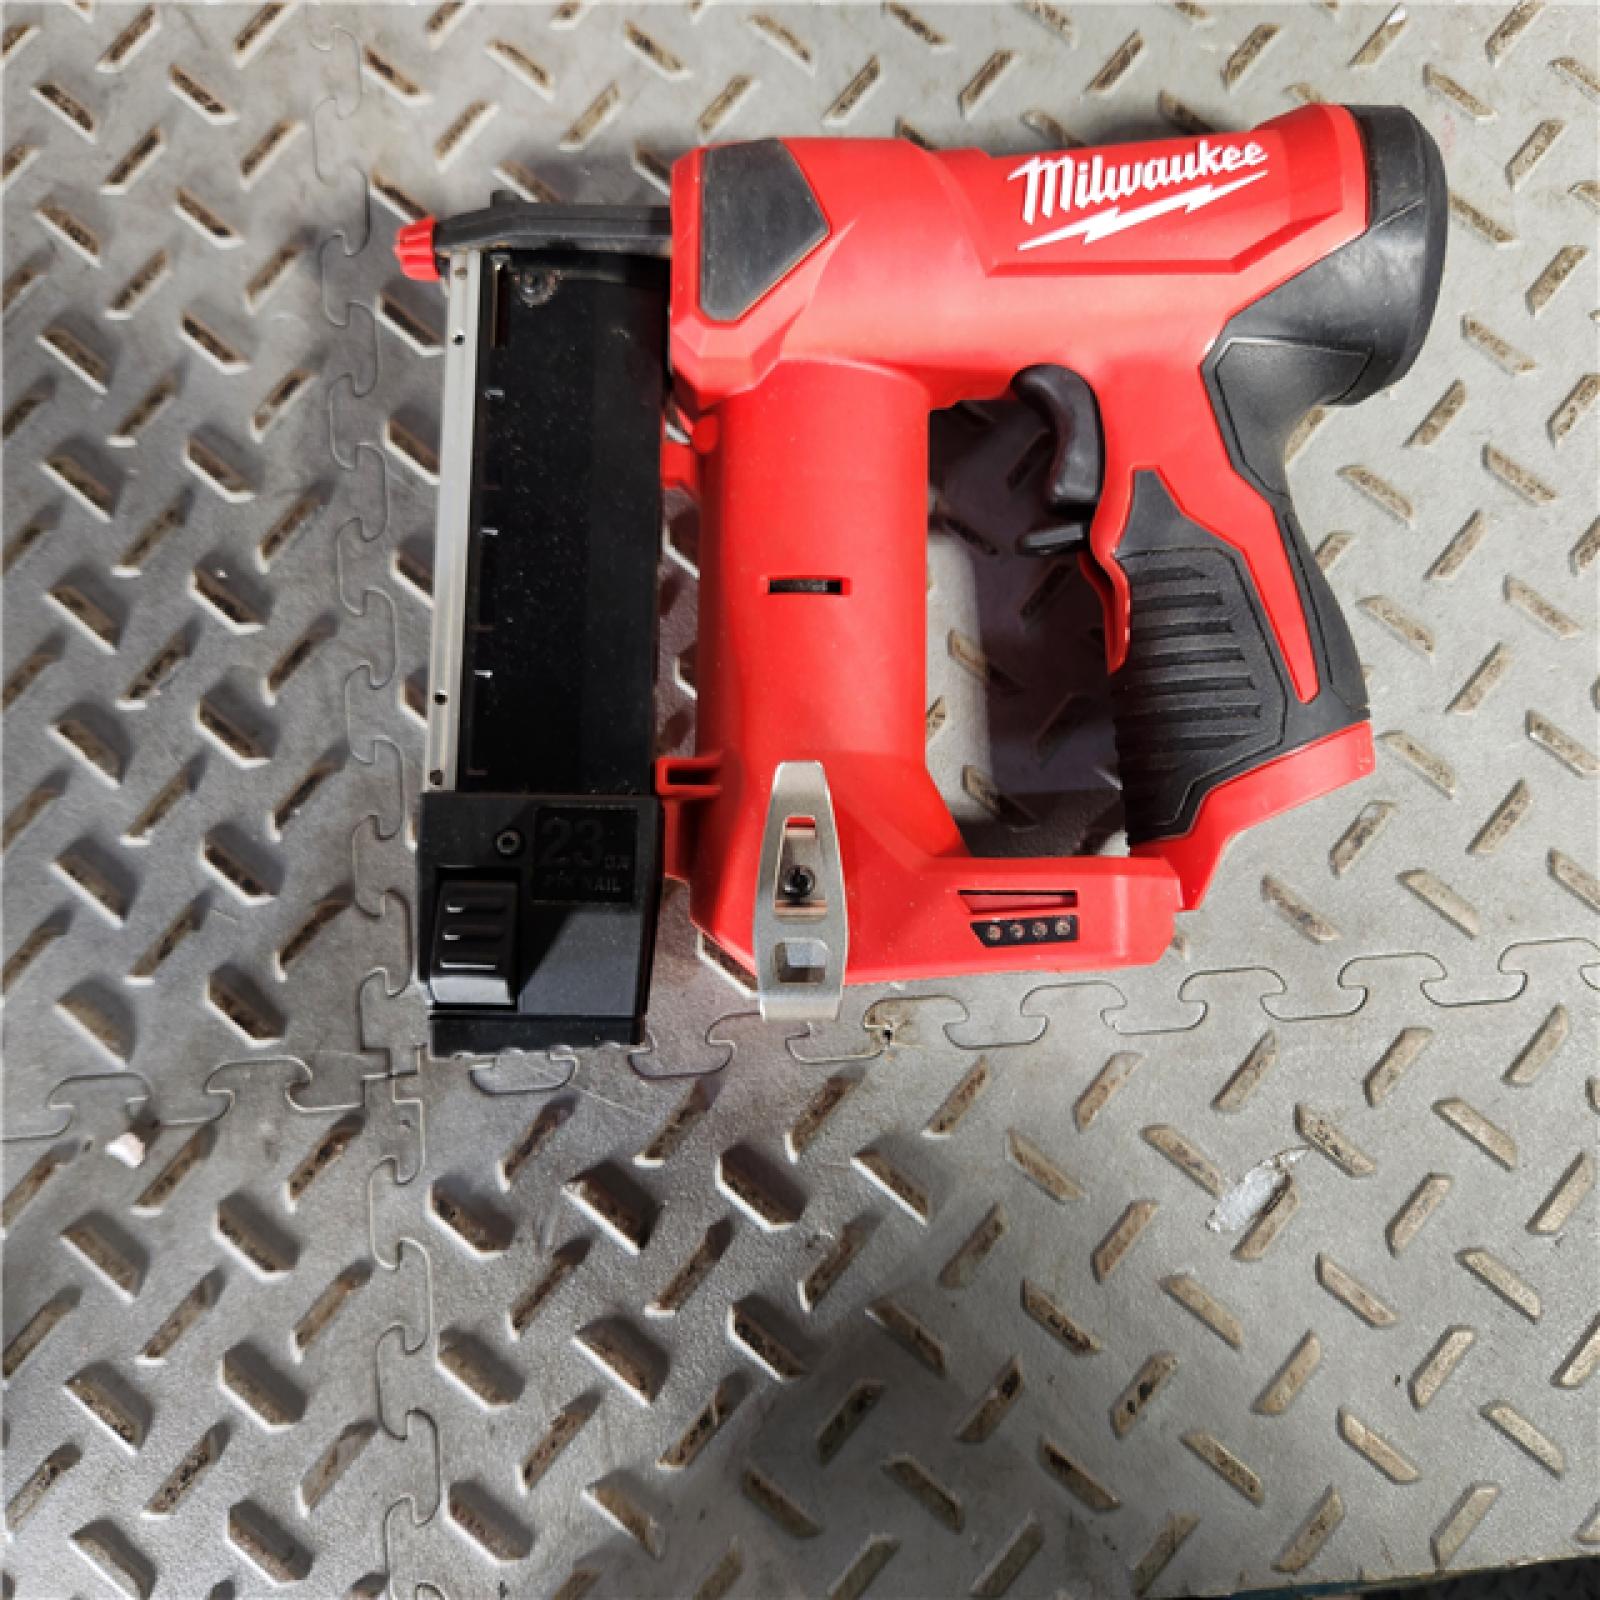 Houston location- AS-IS Milwaukee 2540-20 12V 23 Gauge Cordless Pin Nailer (Tool Only)